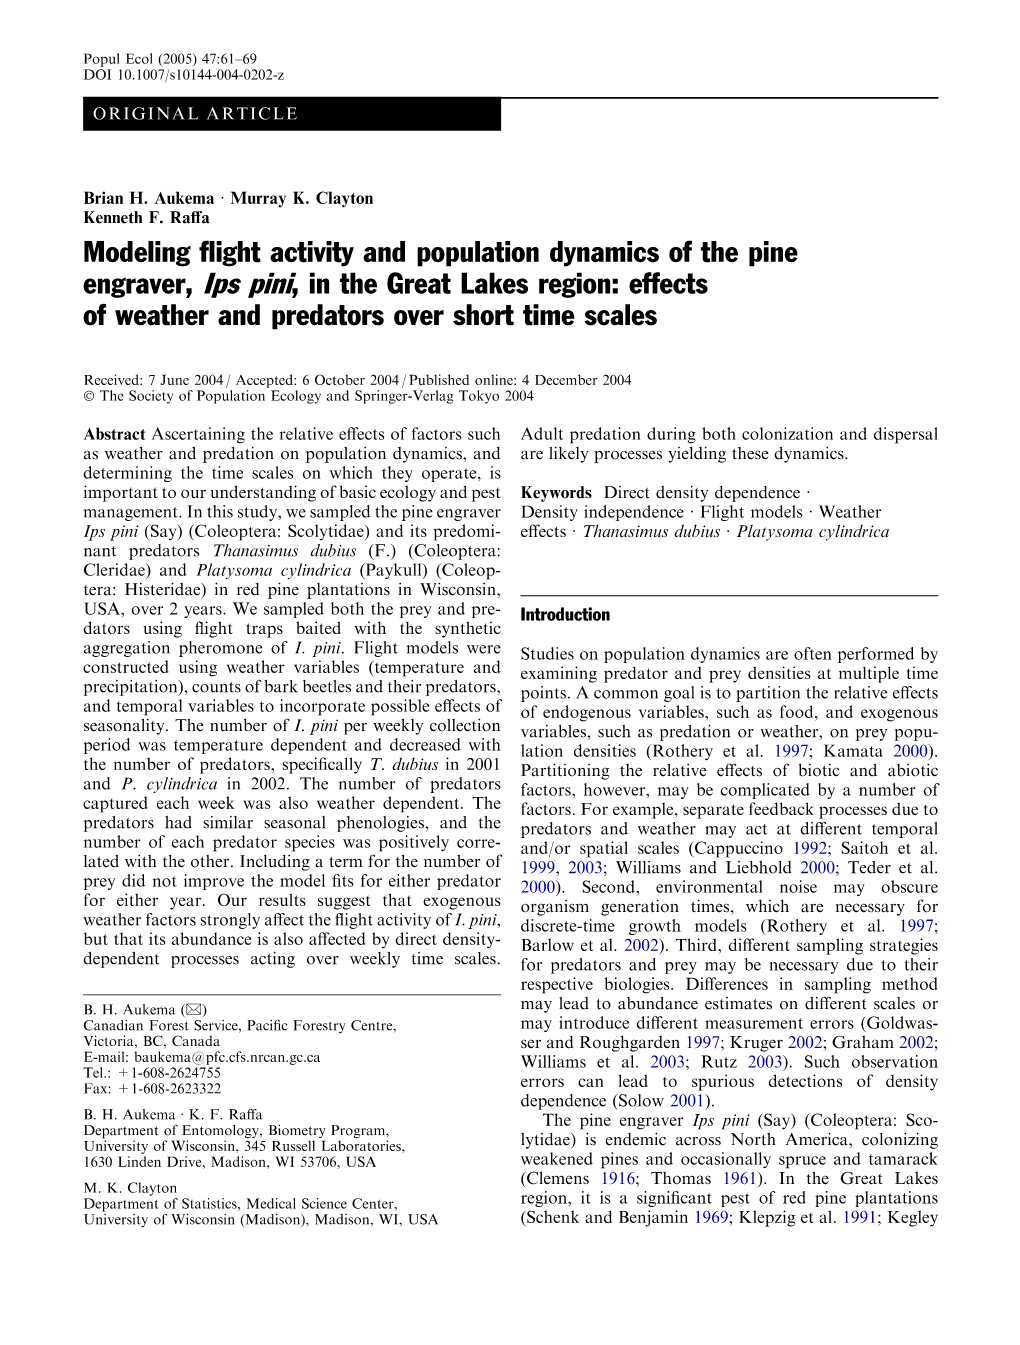 Modeling Flight Activity and Population Dynamics of the Pine Engraver, Ips